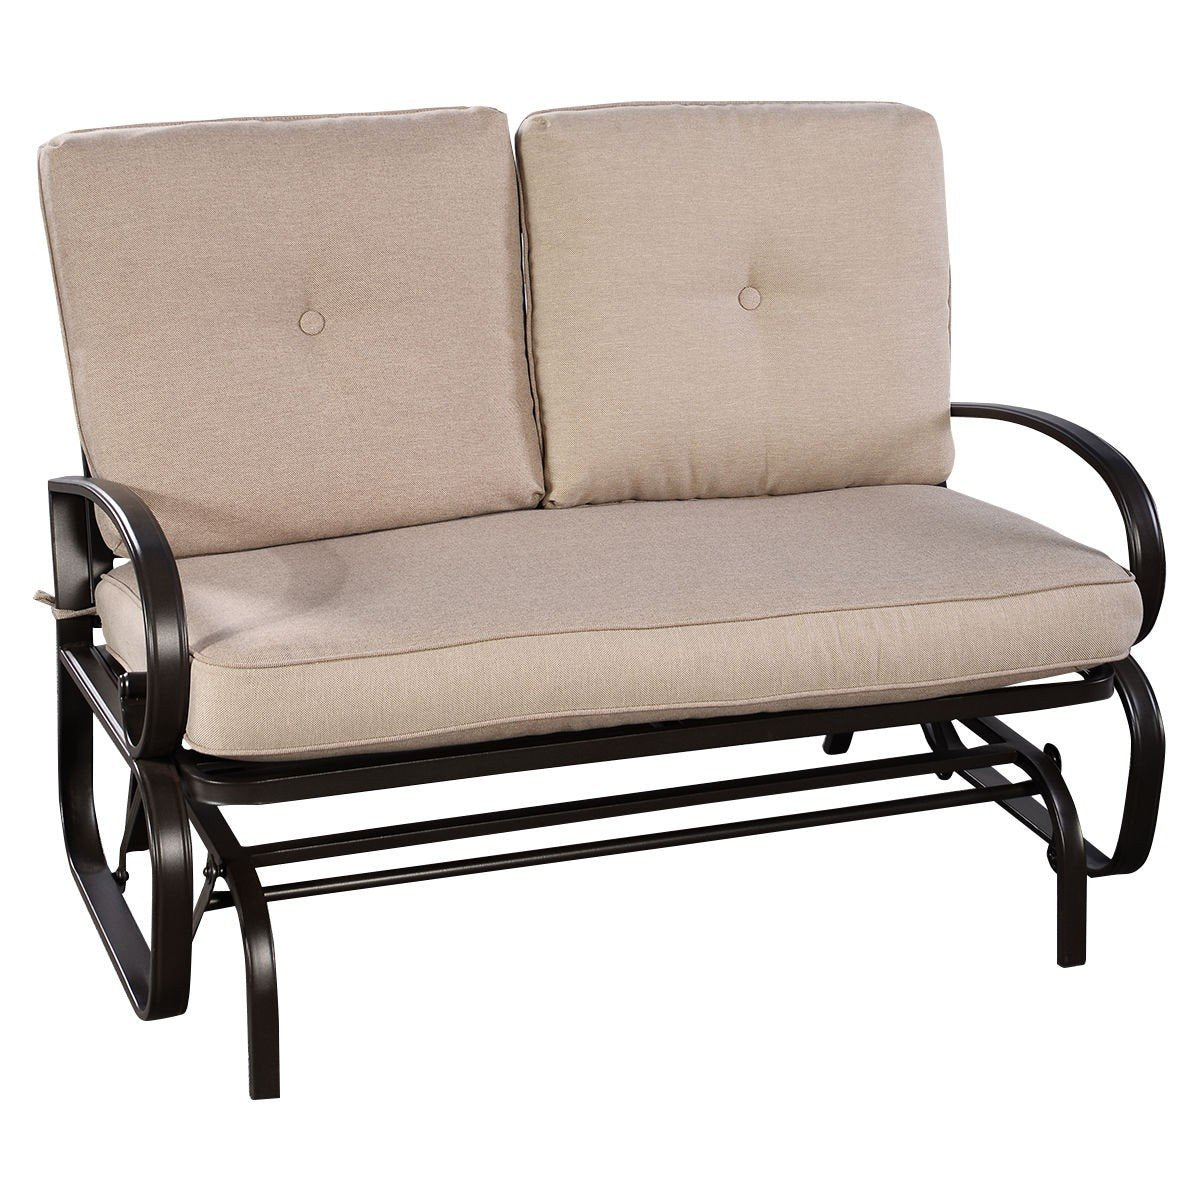 Giantex Loveseat Outdoor Patio Rocking Glider Cushioned 2 Seats